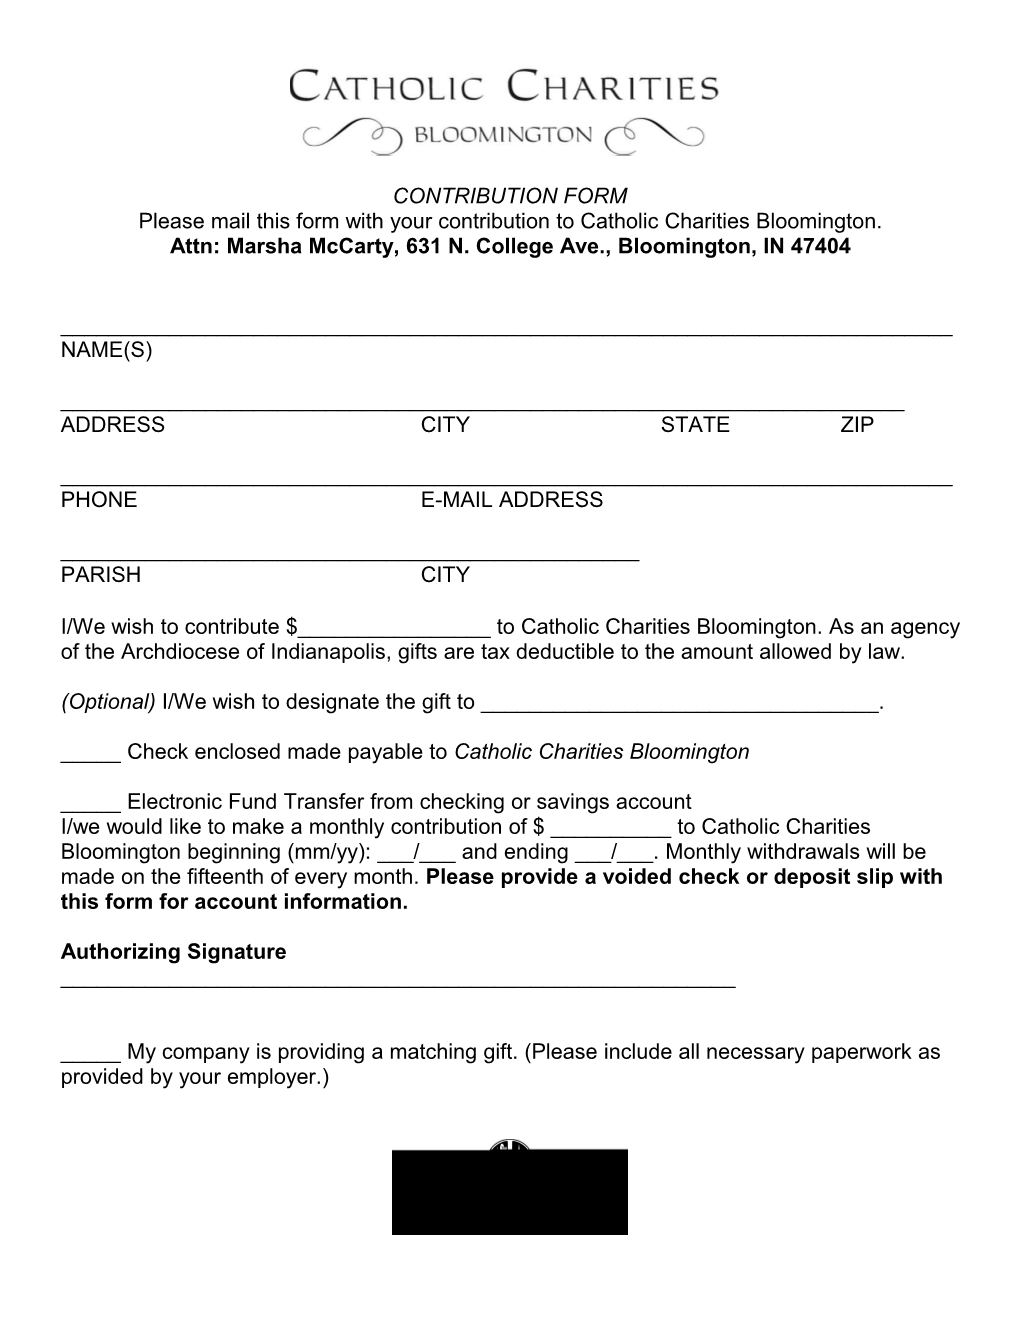 Please Mail This Form with Your Contribution to Catholic Charities Bloomington